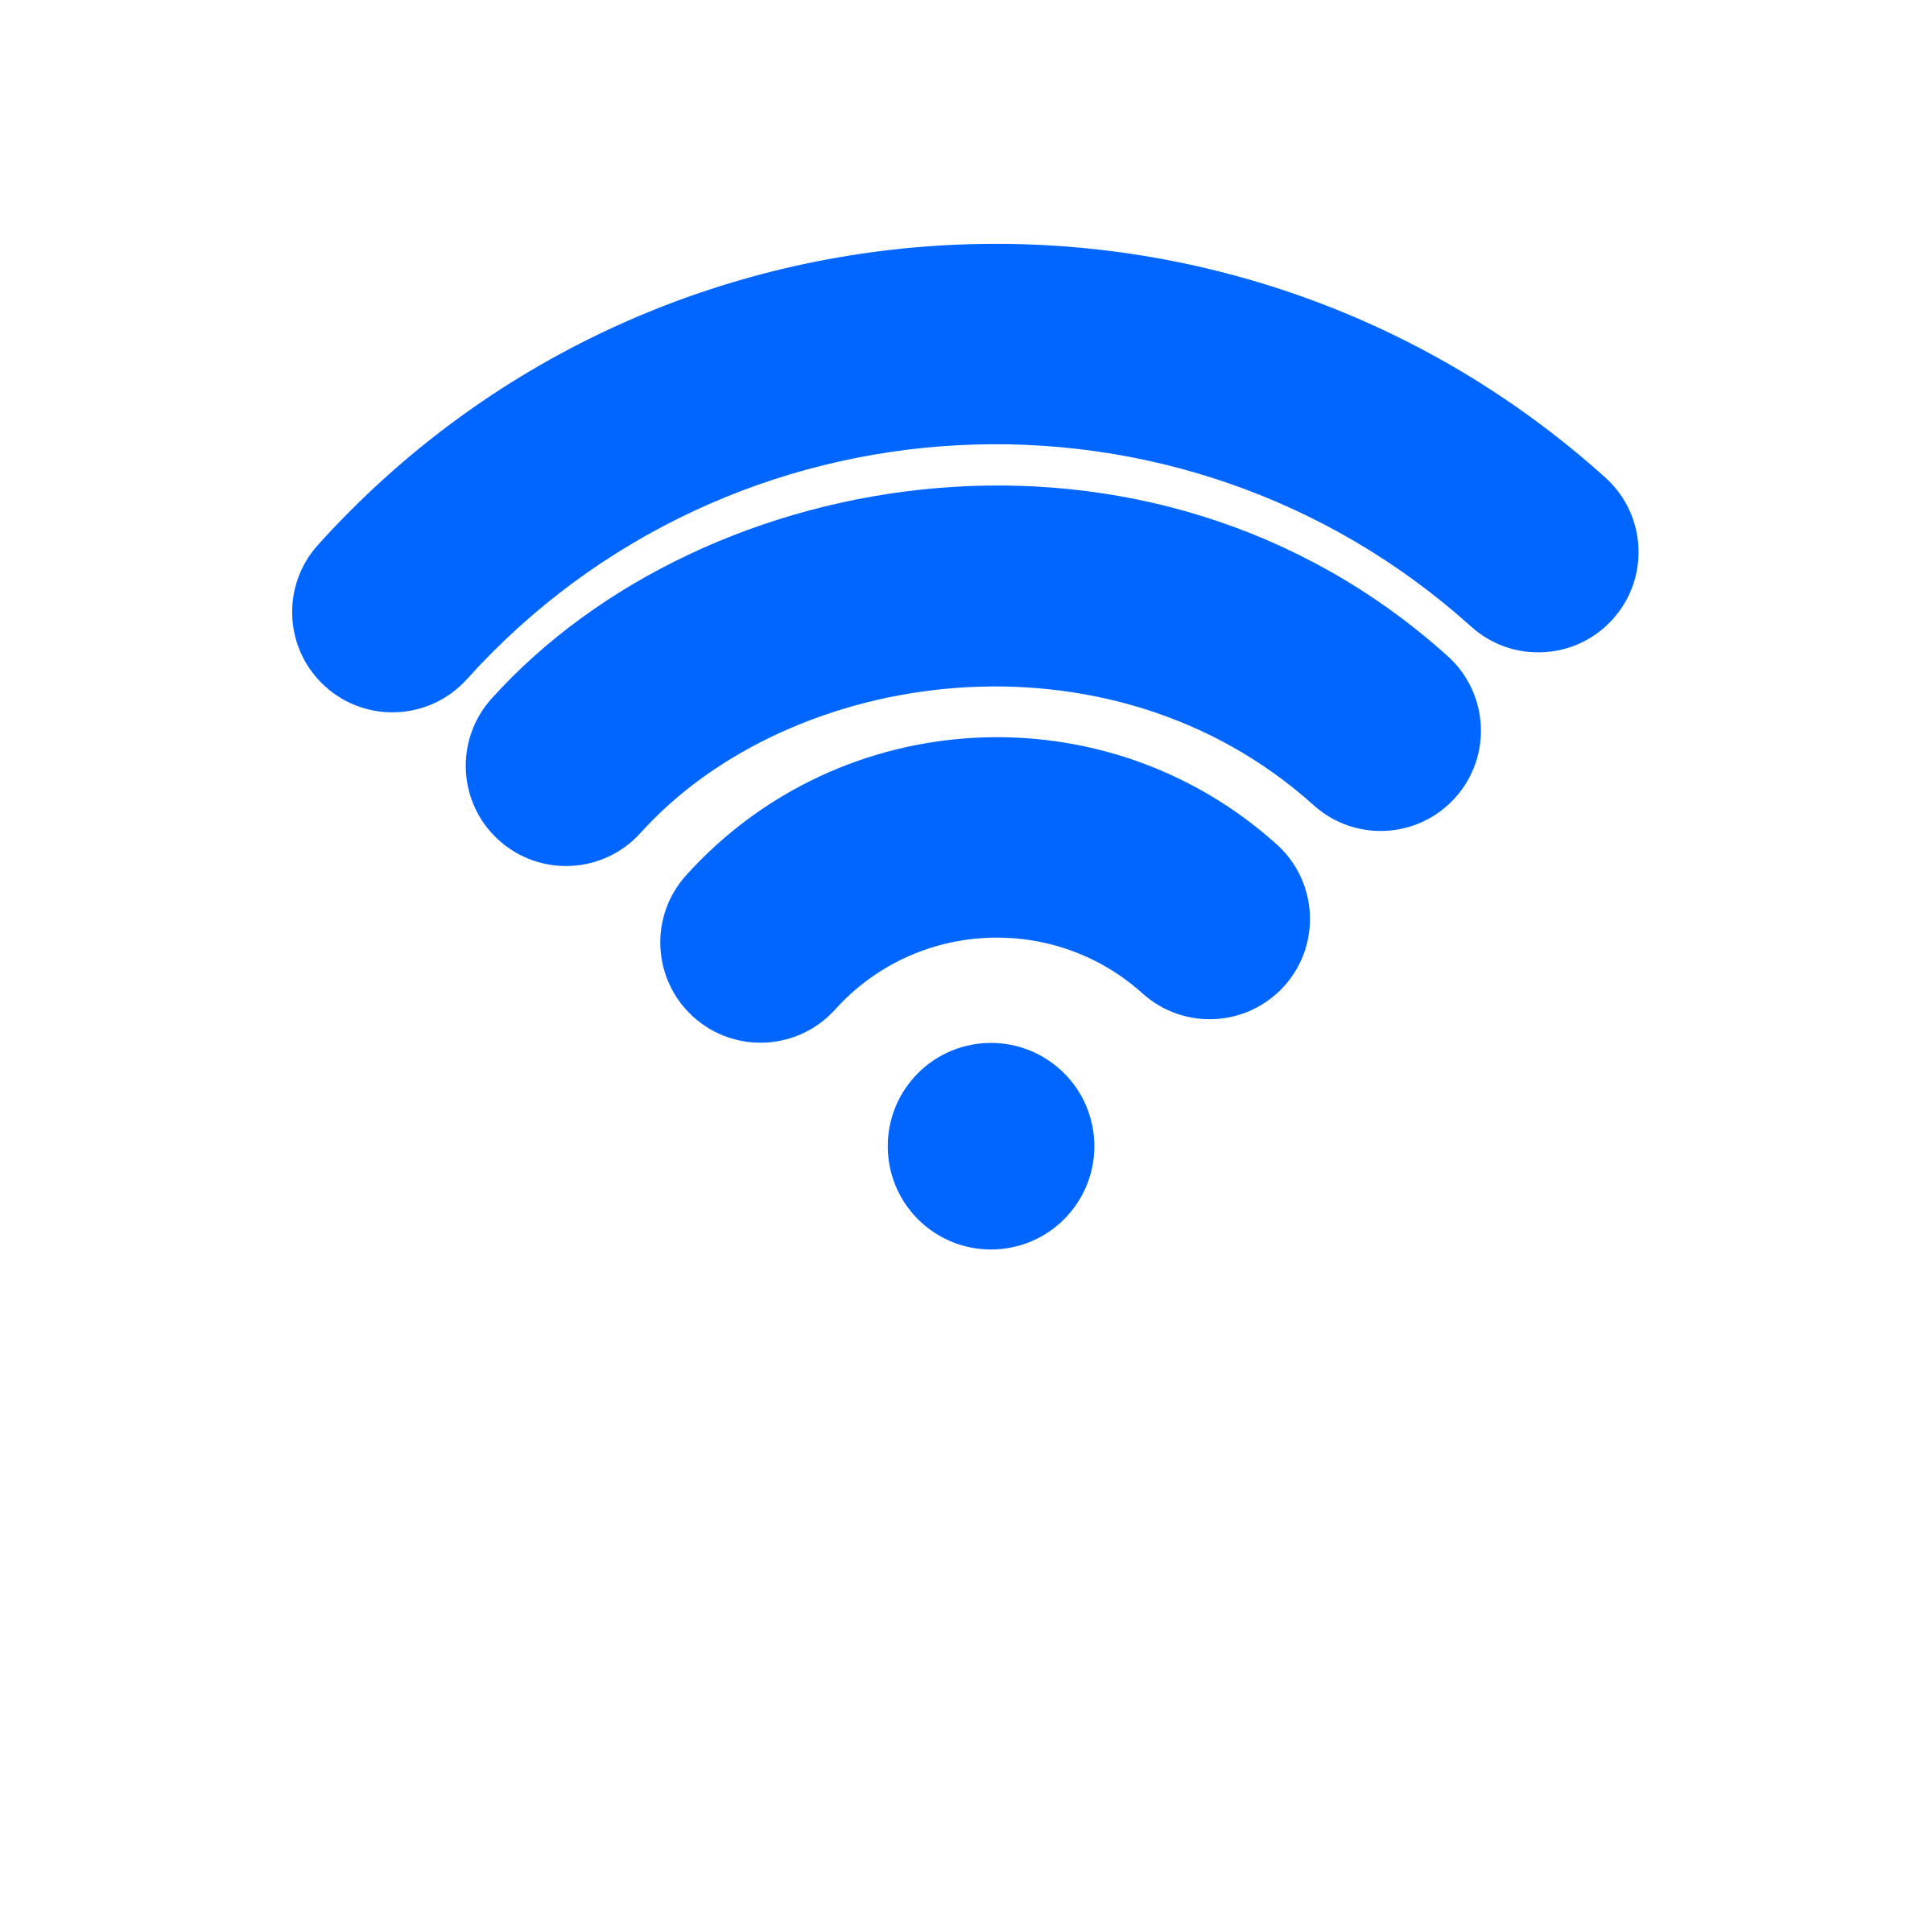 Free Wifi Symbol Cliparts, Download Free Wifi Symbol Cliparts png